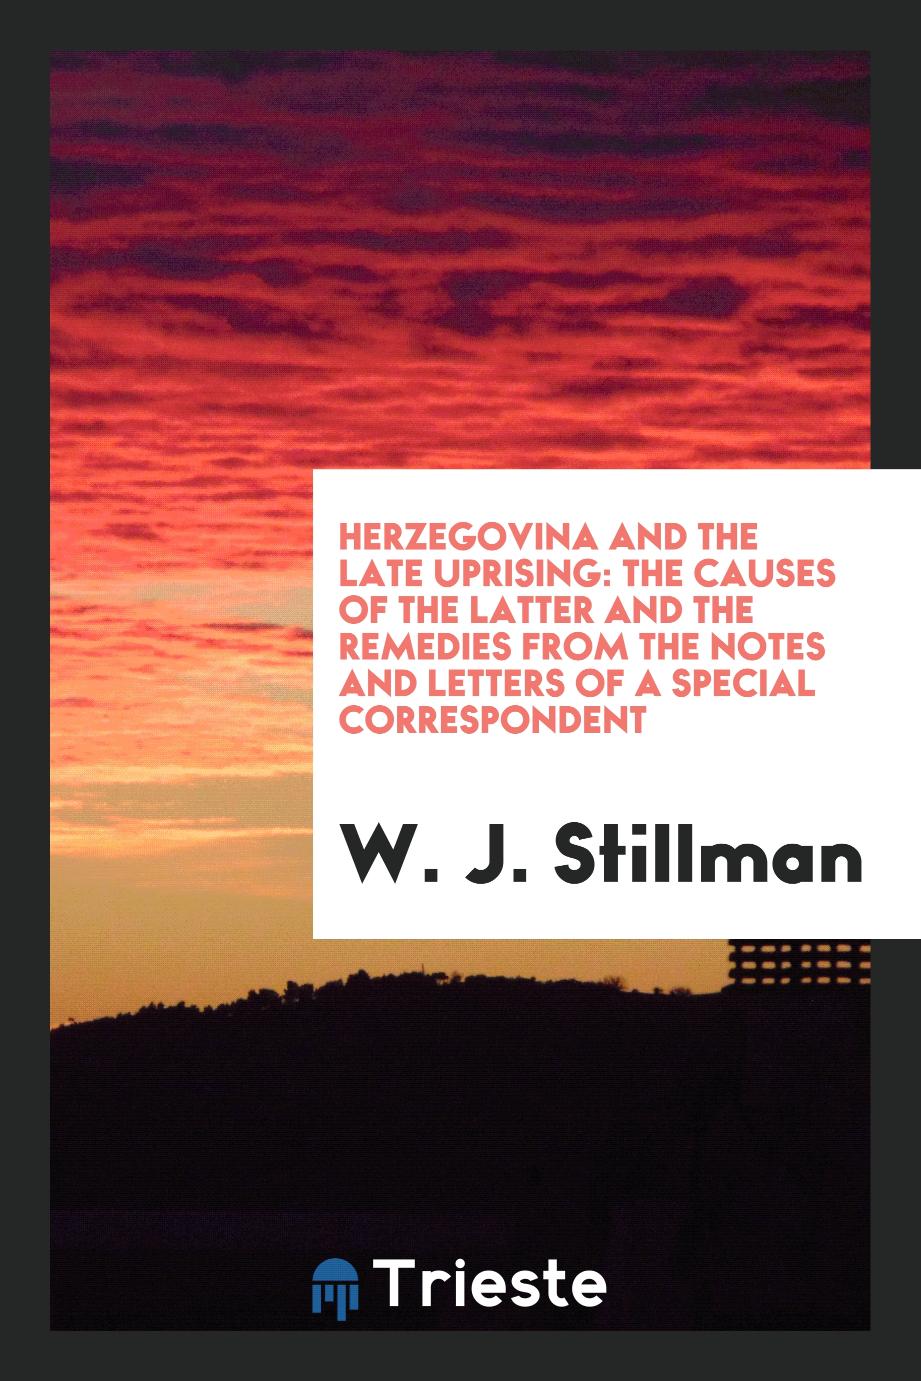 Herzegovina and the Late Uprising: The Causes of the Latter and the Remedies from the Notes and Letters of a Special Correspondent